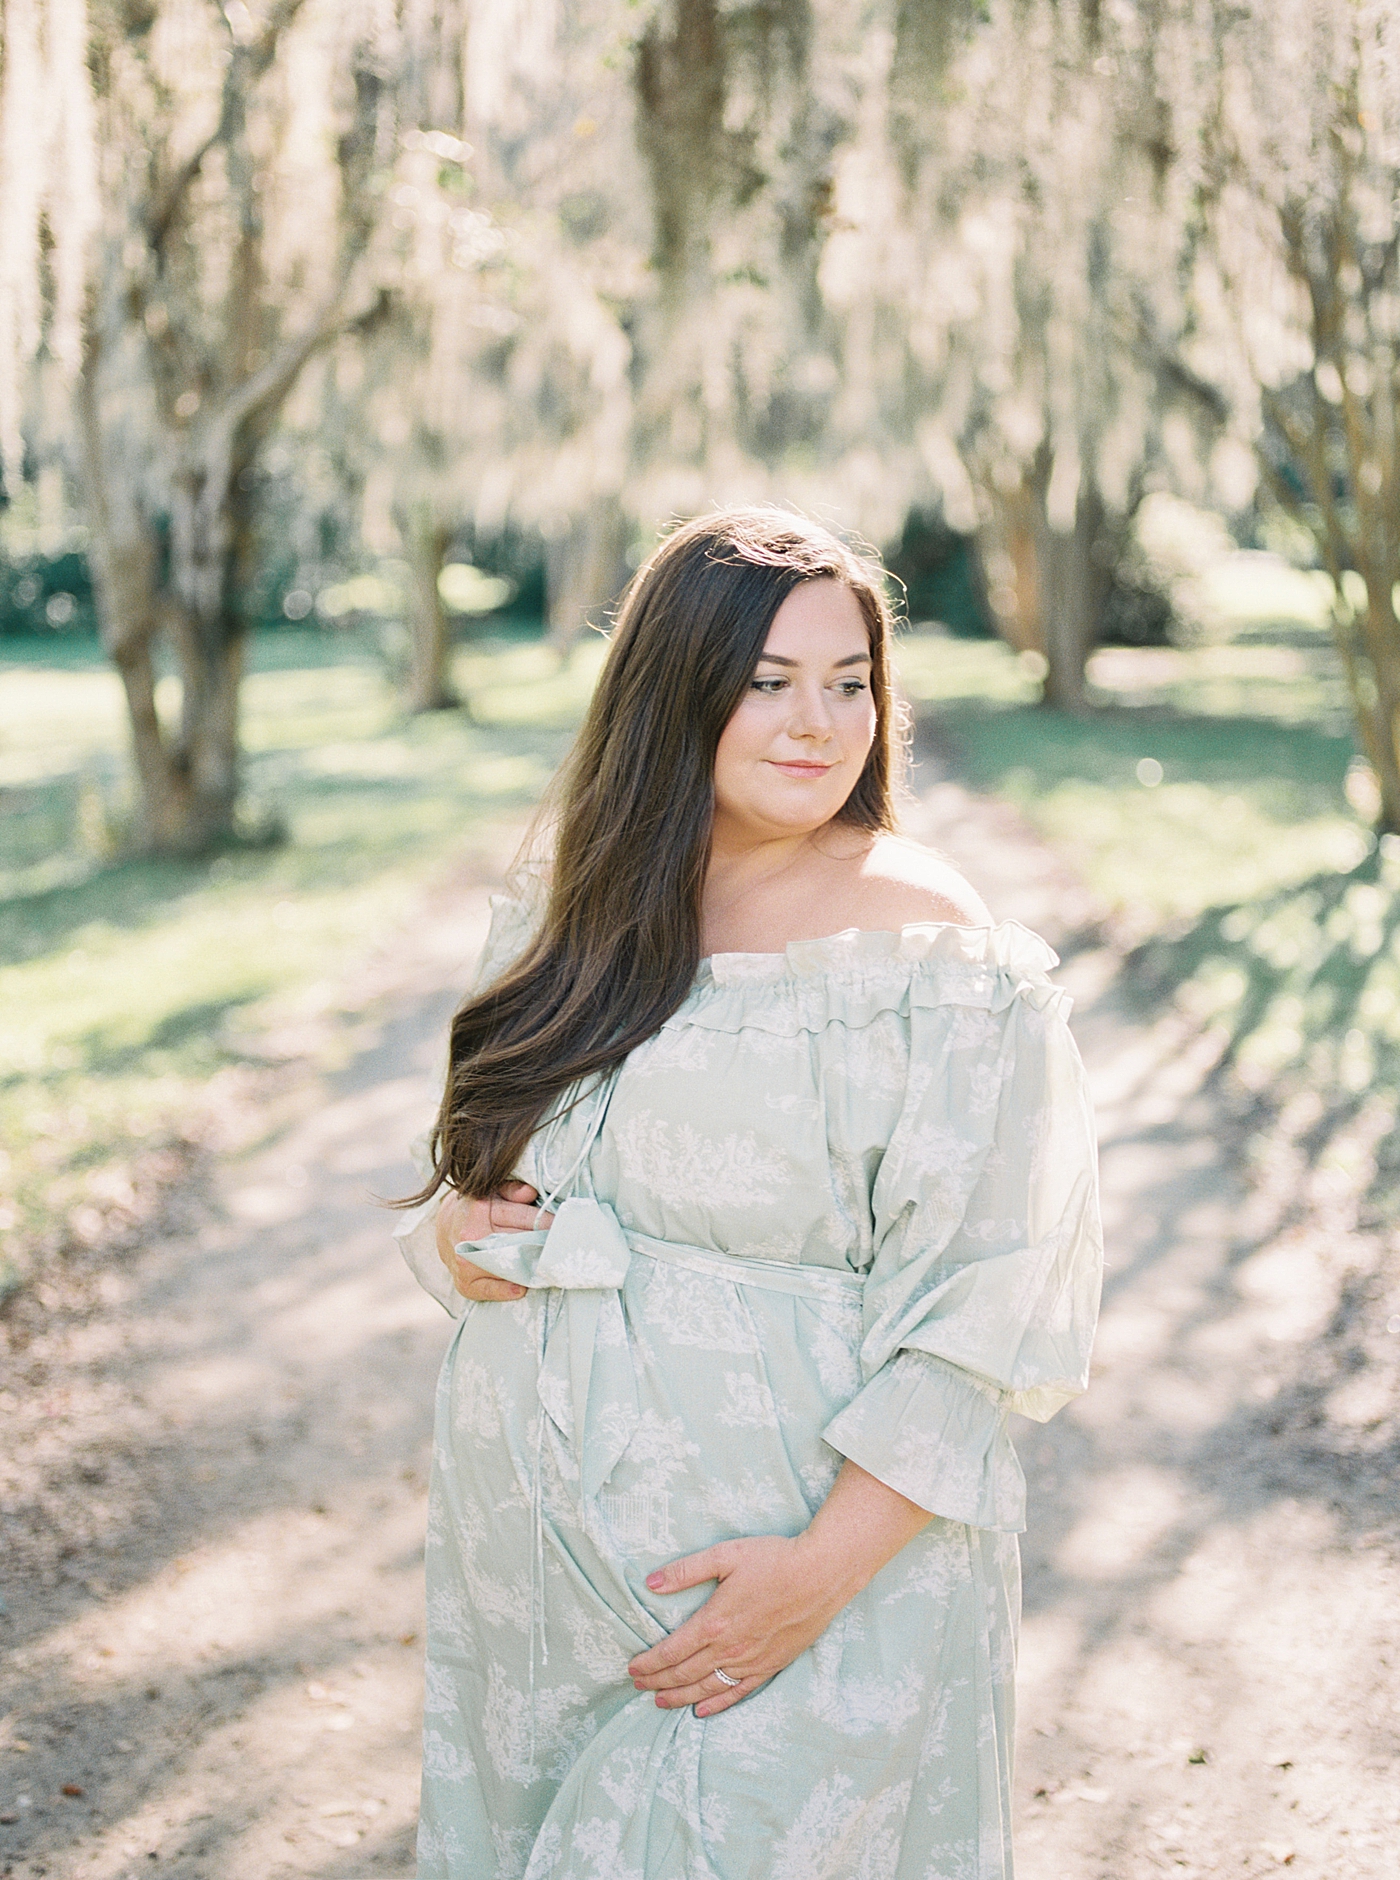 Expecting mother in a green off-the-shoulder spring dress smiling and holding her pregnant belly under oak tree-lined pathway | Image by Caitlyn Motycka 